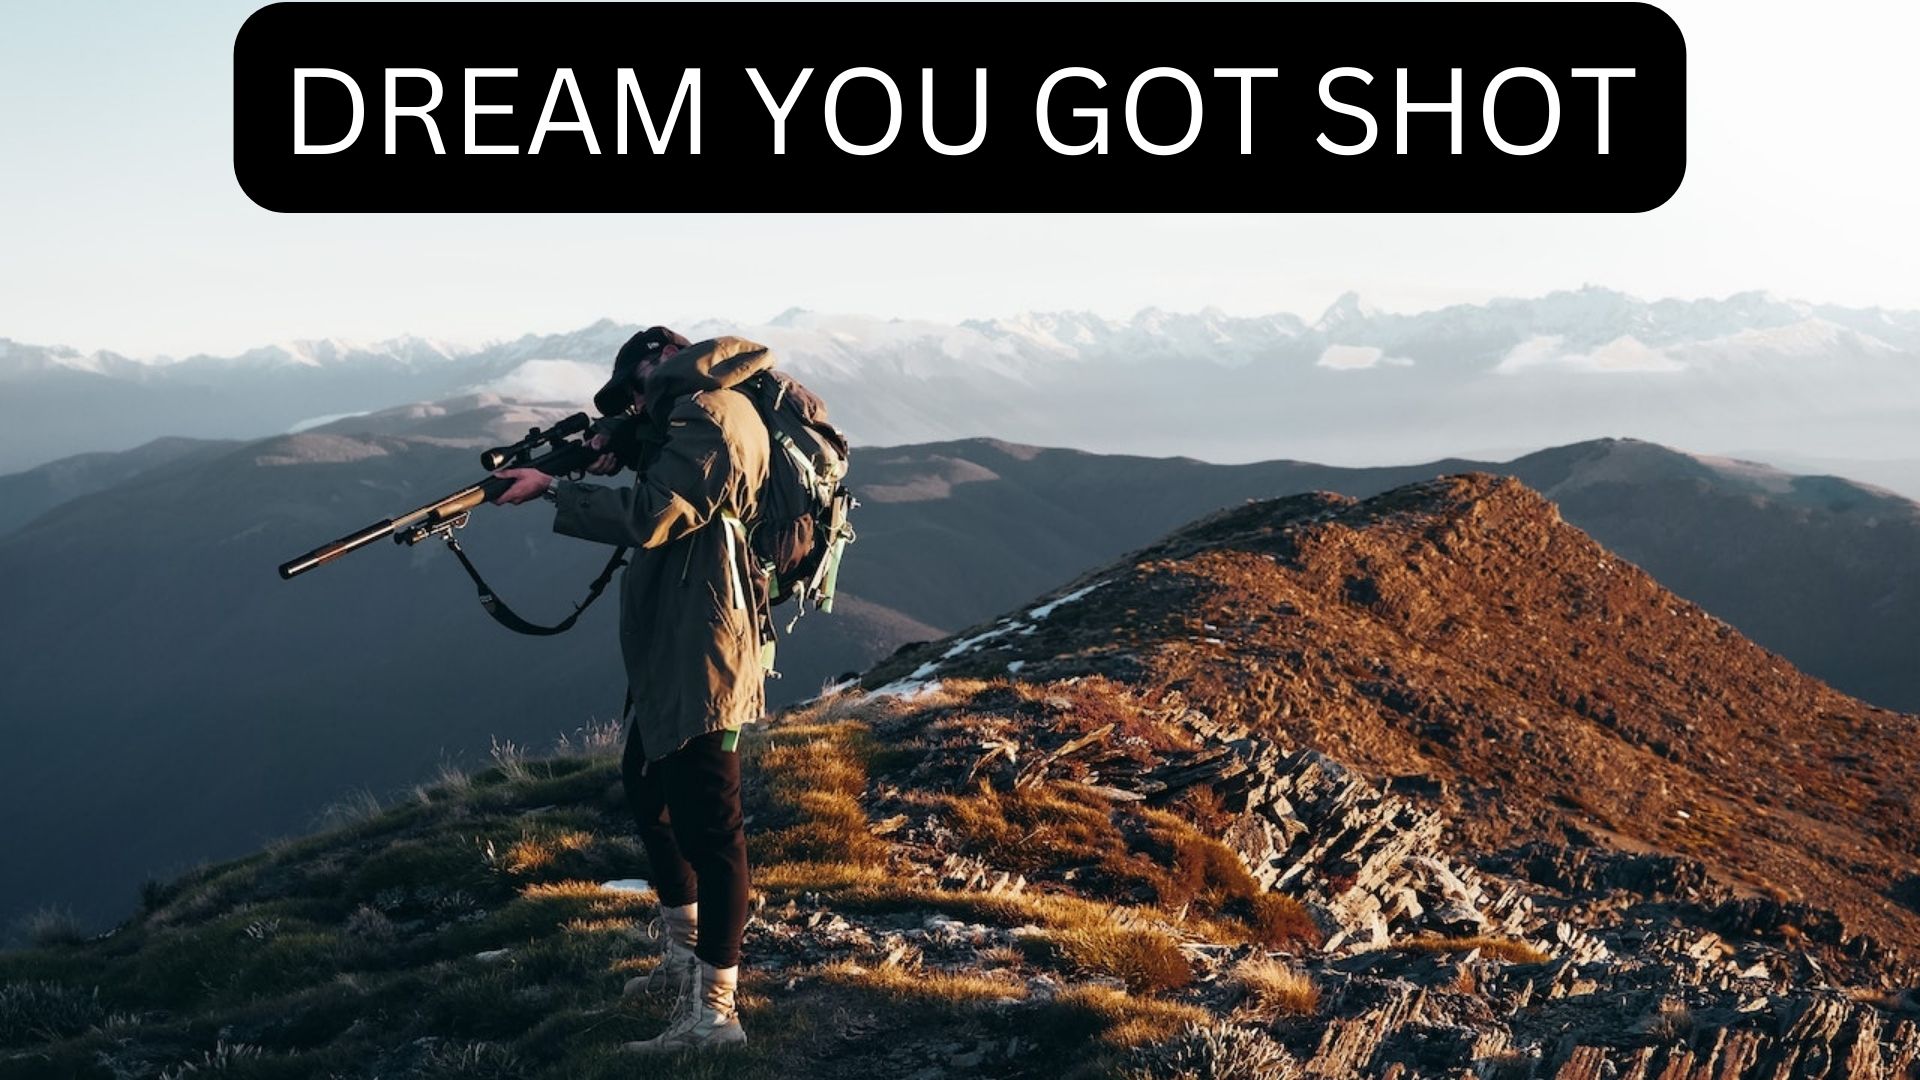 Dream You Got Shot - Learn How To Handle The Difficulties In Life